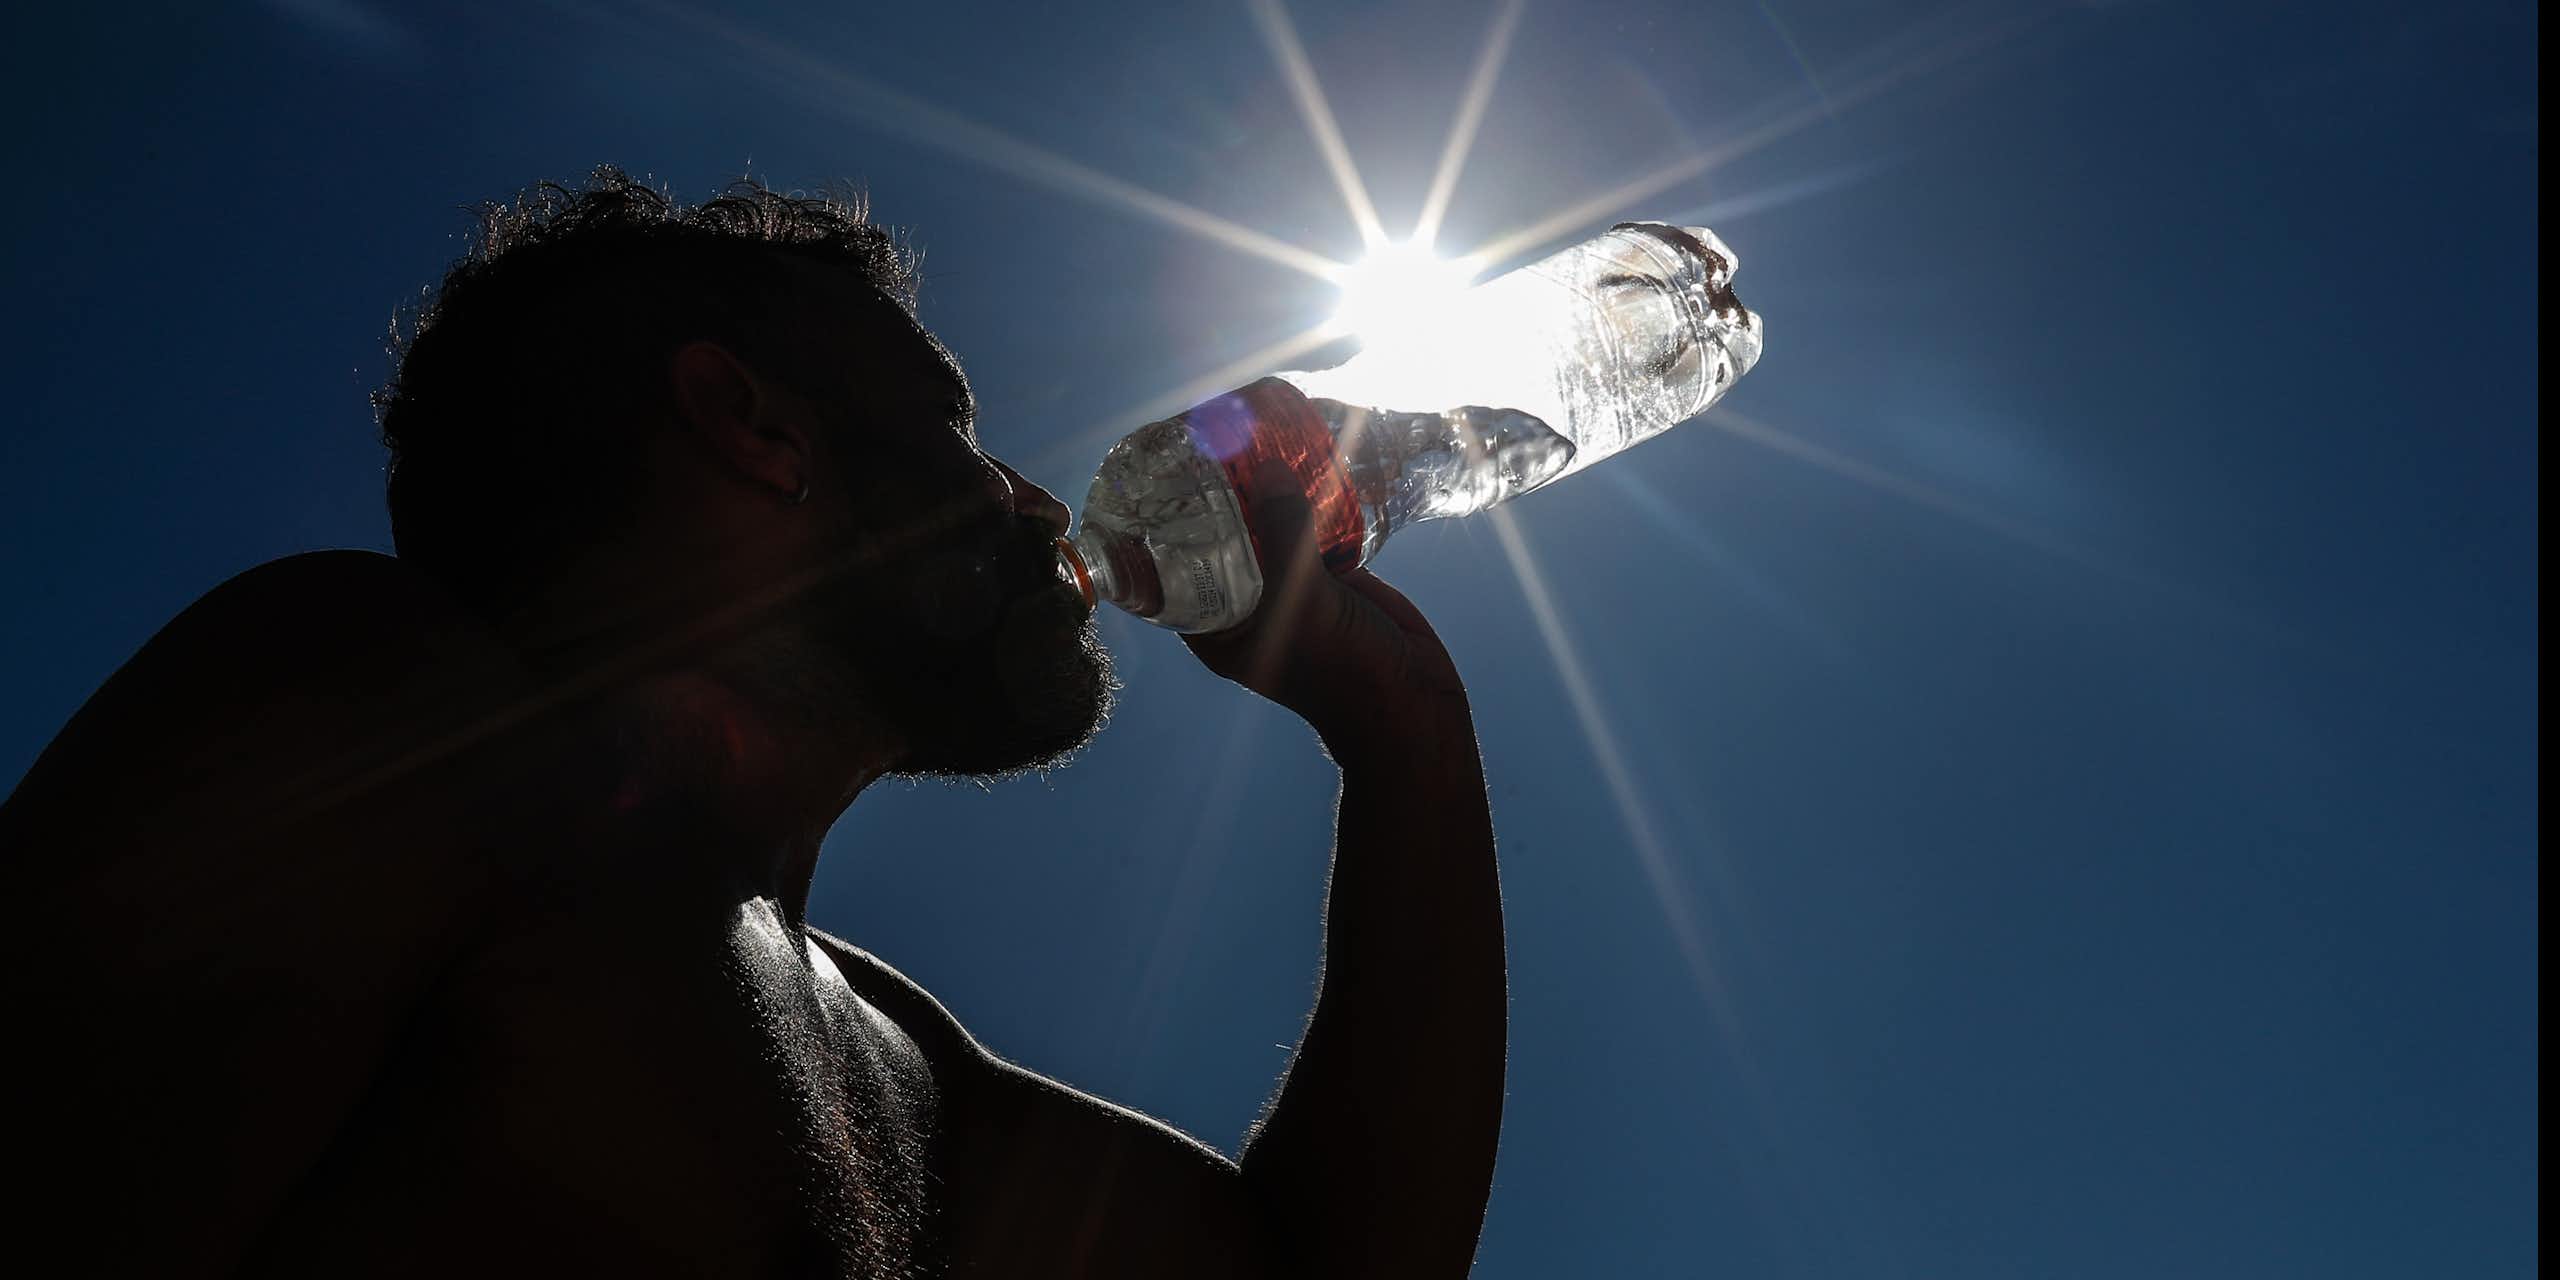 A silhouette of someone drinking water from a plastic bottle.